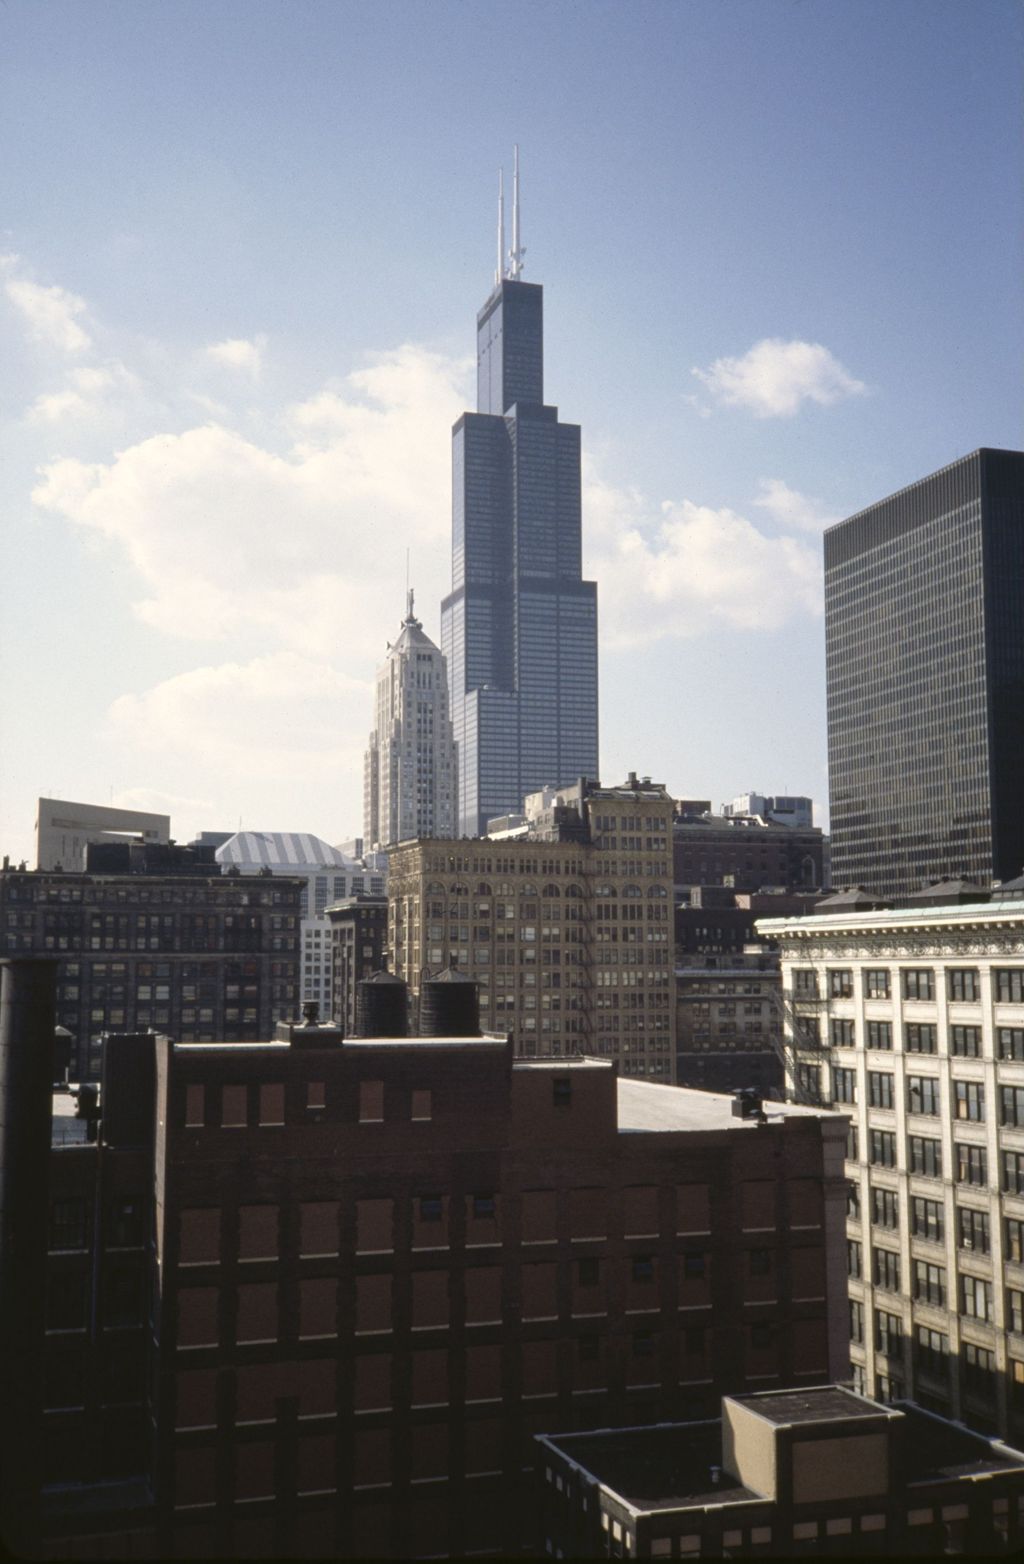 Miniature of Sears Tower from the Herman Crown Center